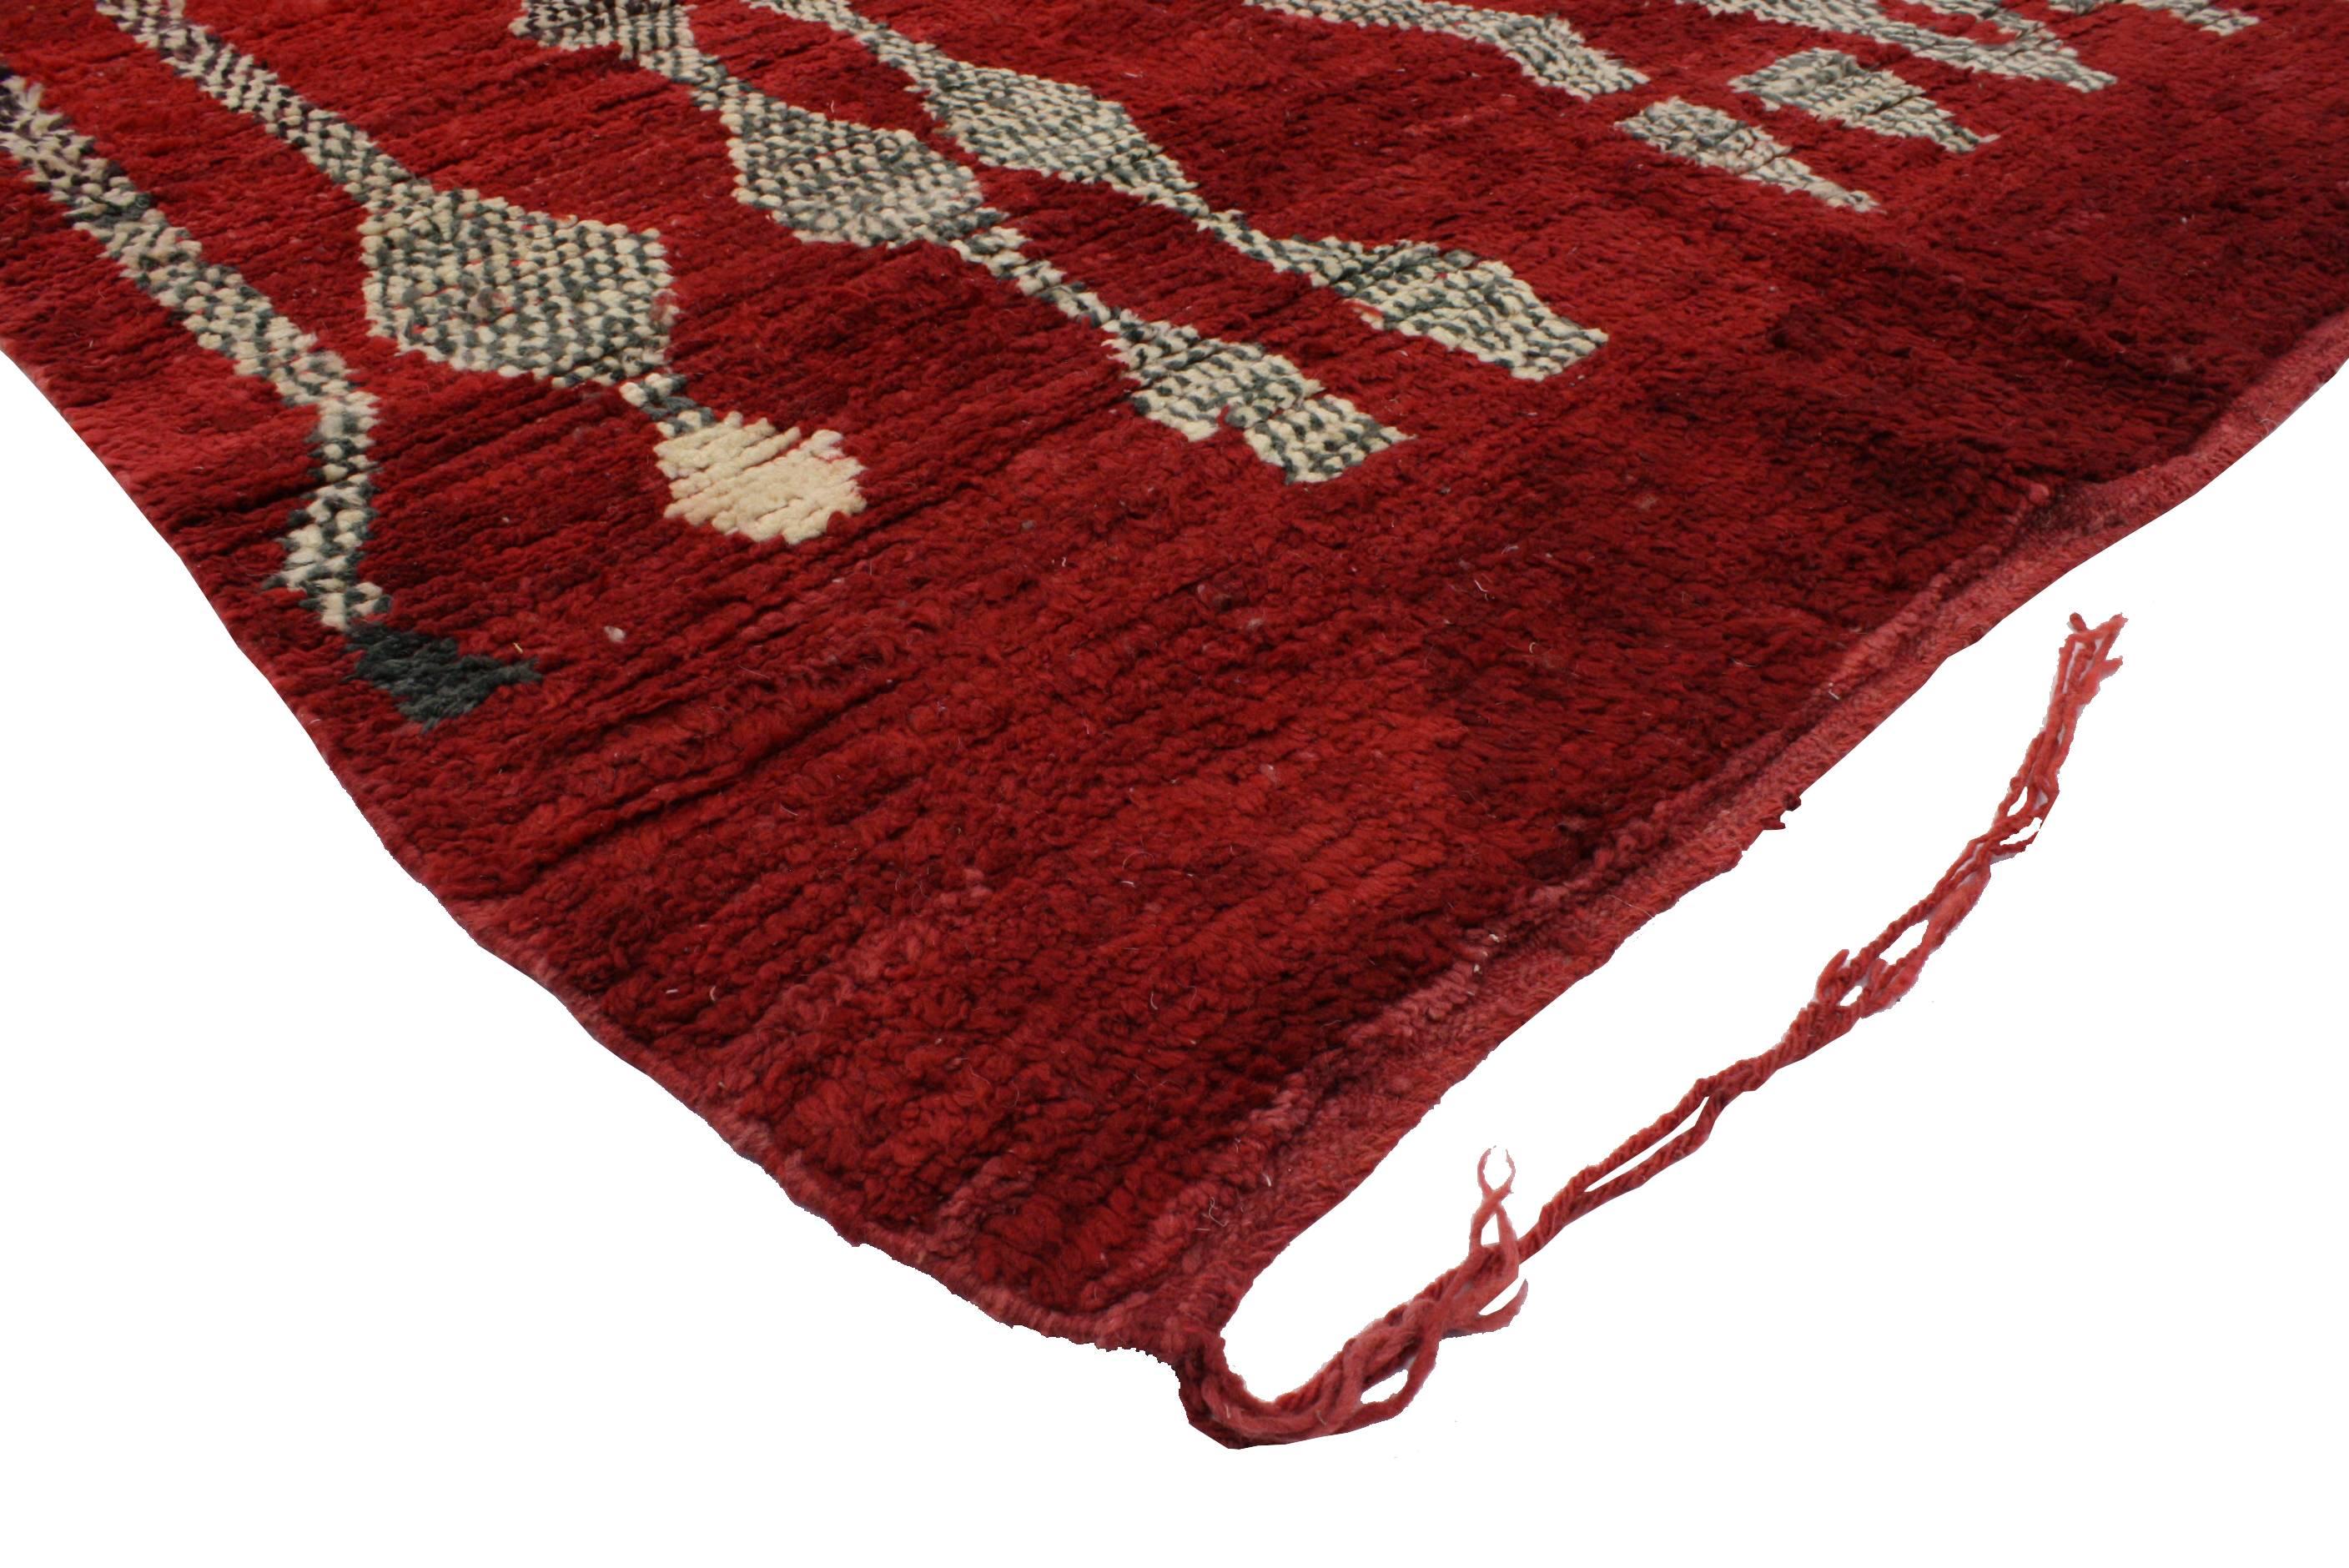 Adding a chic Bohemian flair to timeless tribal design, this eccentric Moroccan rug will create a truly tempting look for nearly any space. Exploding with a vibrant color palette of red, pink and green, the black and white accents contrast nicely on